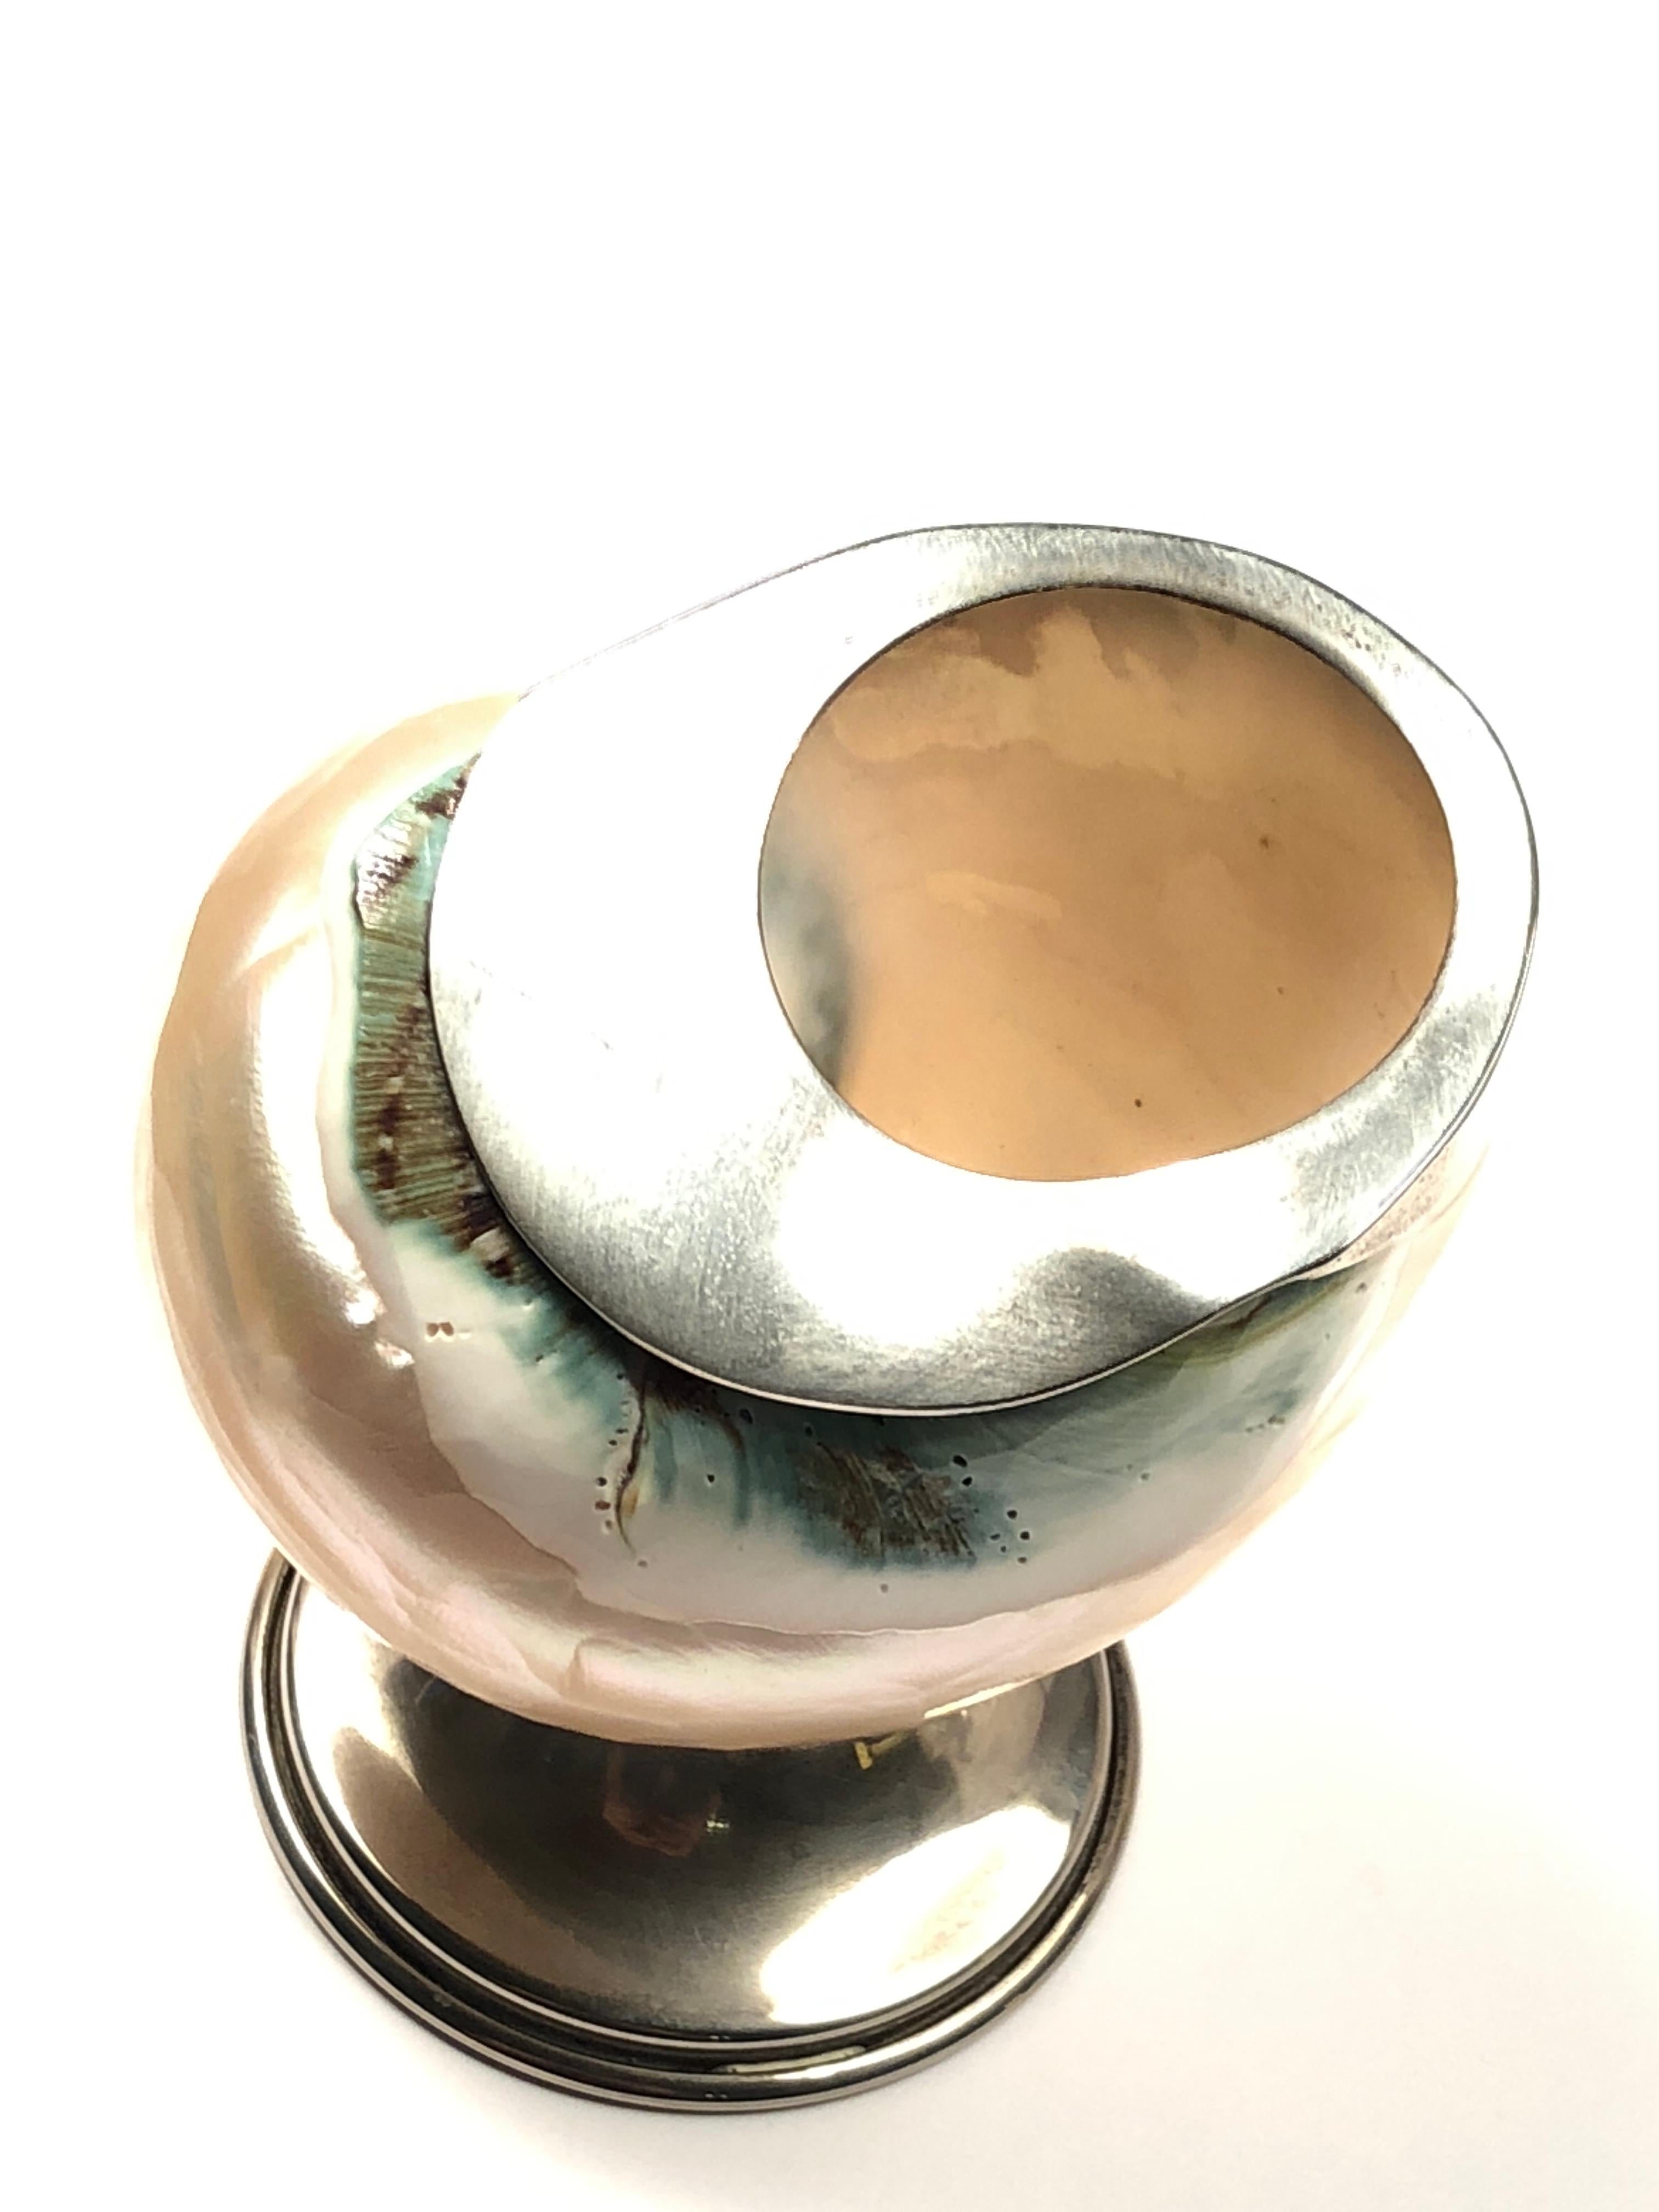 Metalwork Rare Binazzi Shell Trinket Bowl Sculpture, 1970s, Italy For Sale